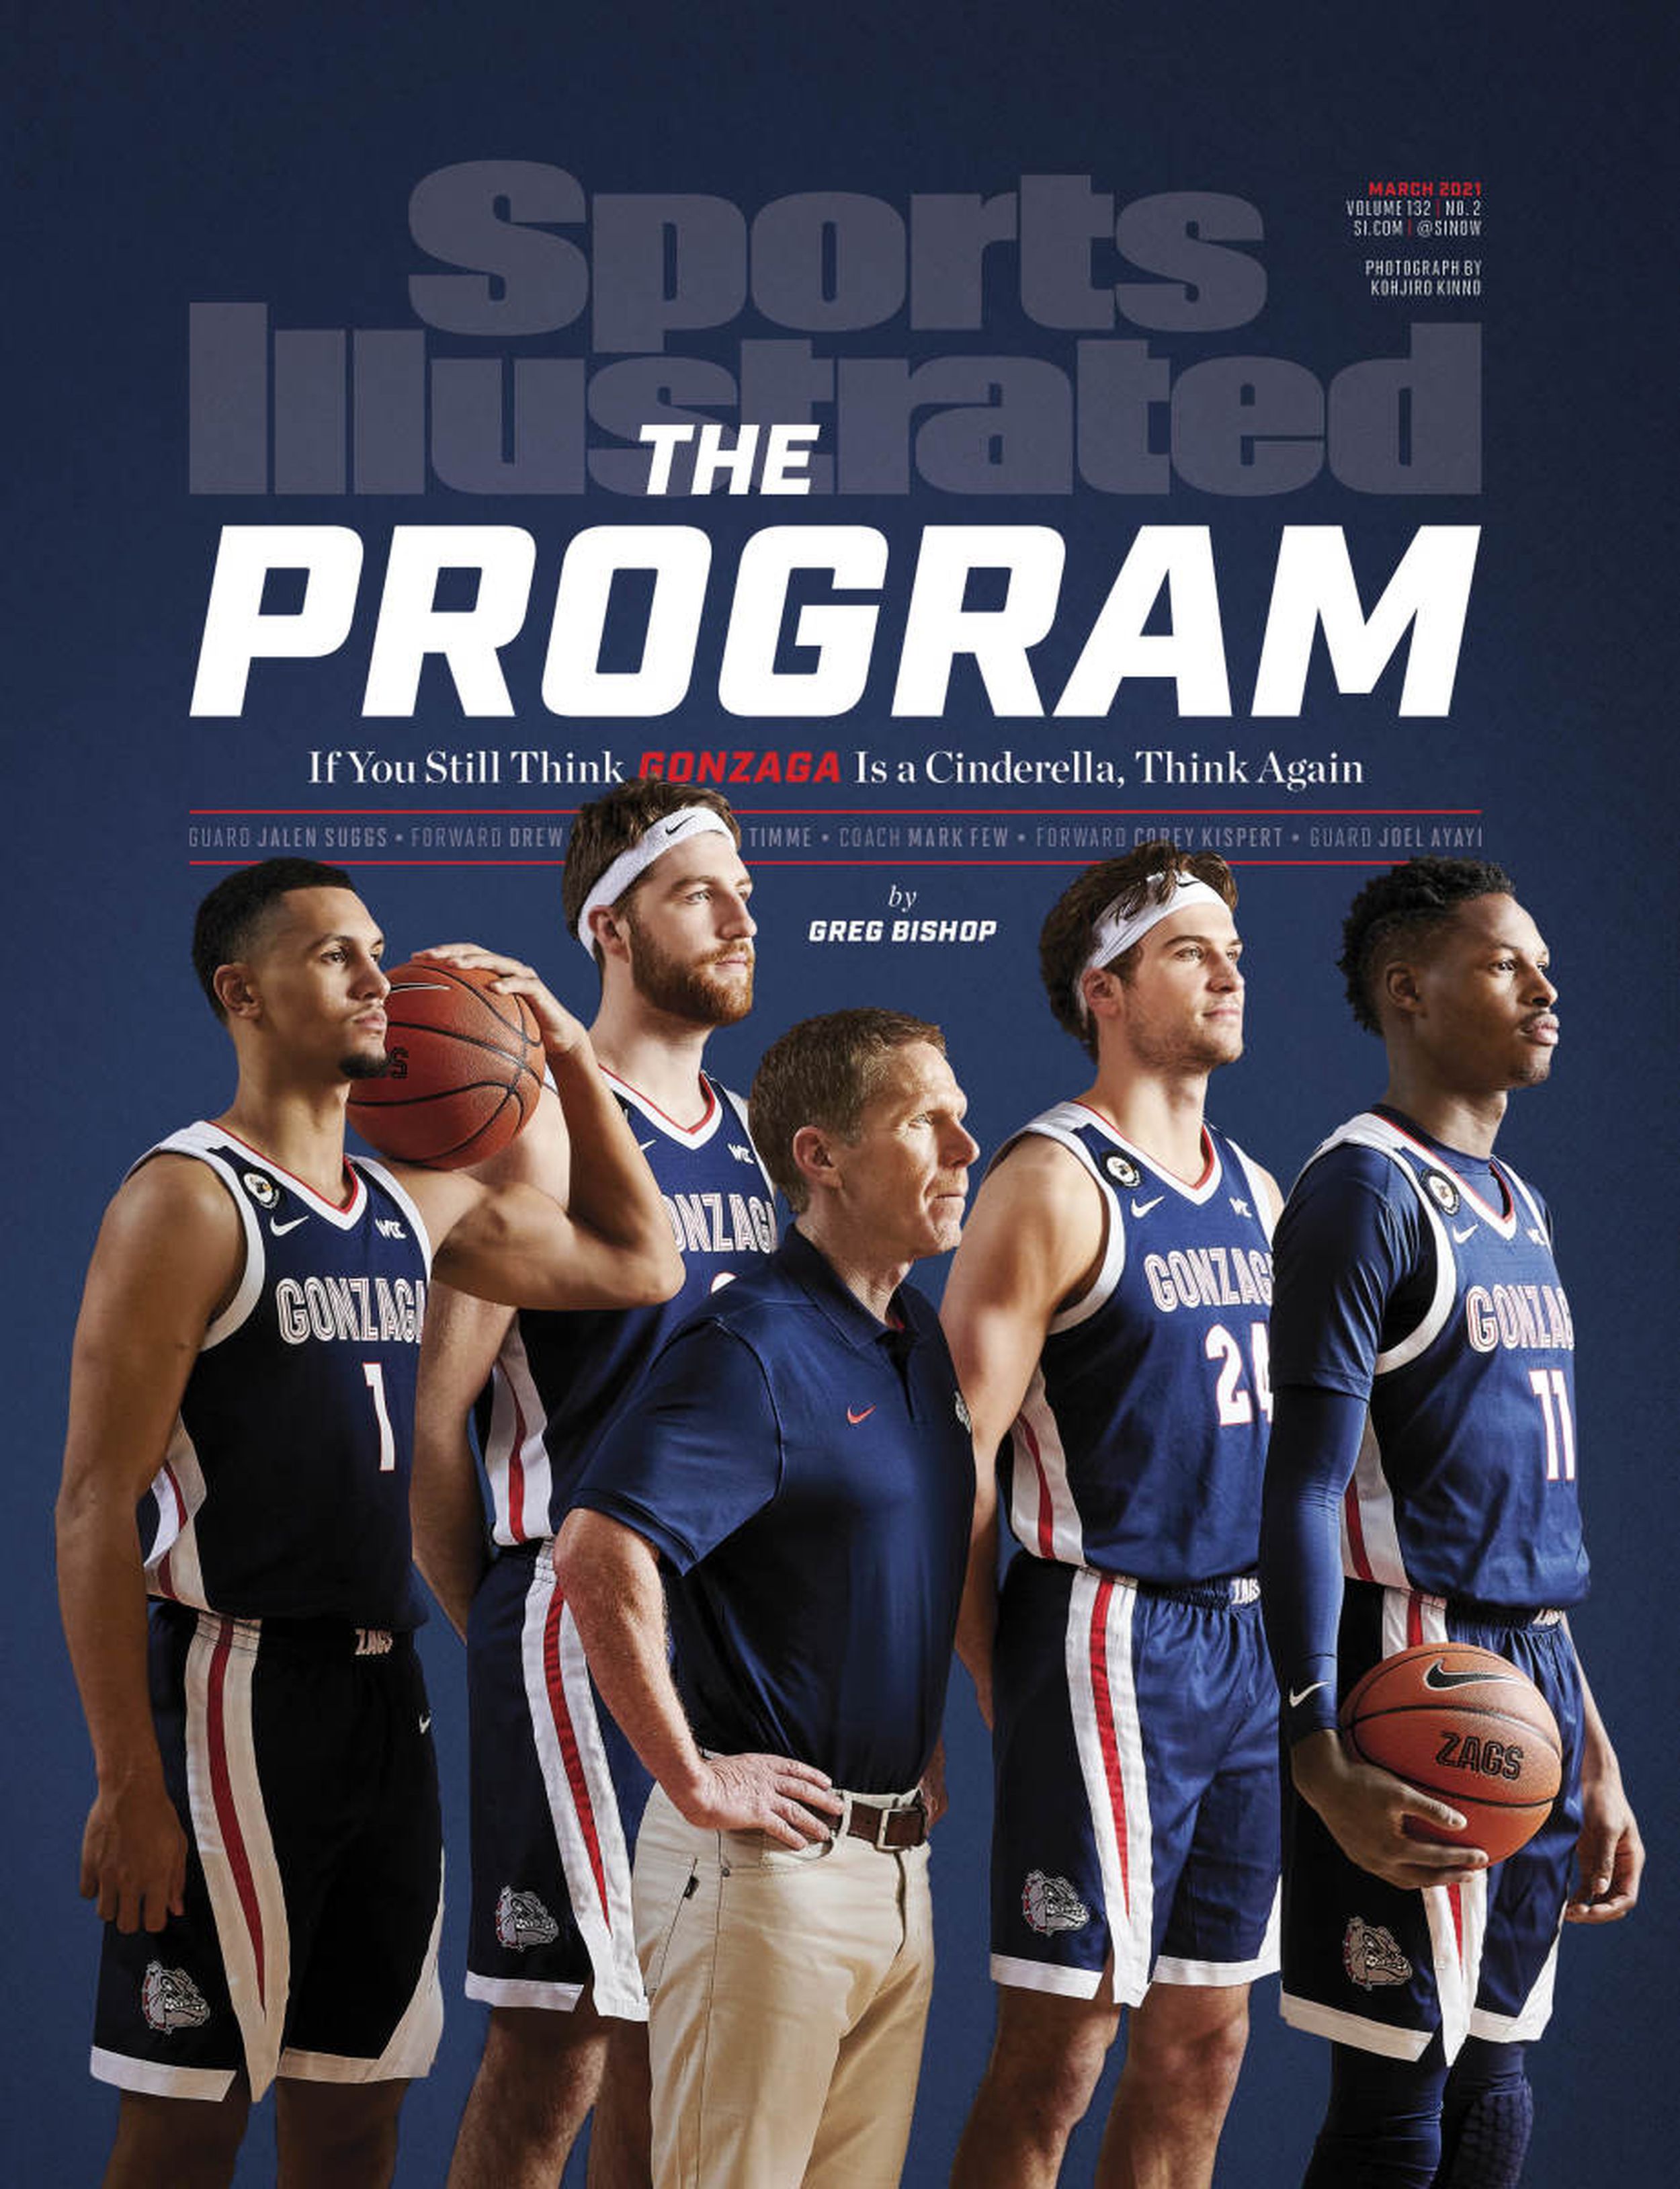 It's the program': As Gonzaga makes the cover of Sports Illustrated, here's  a look at past Bulldogs issues